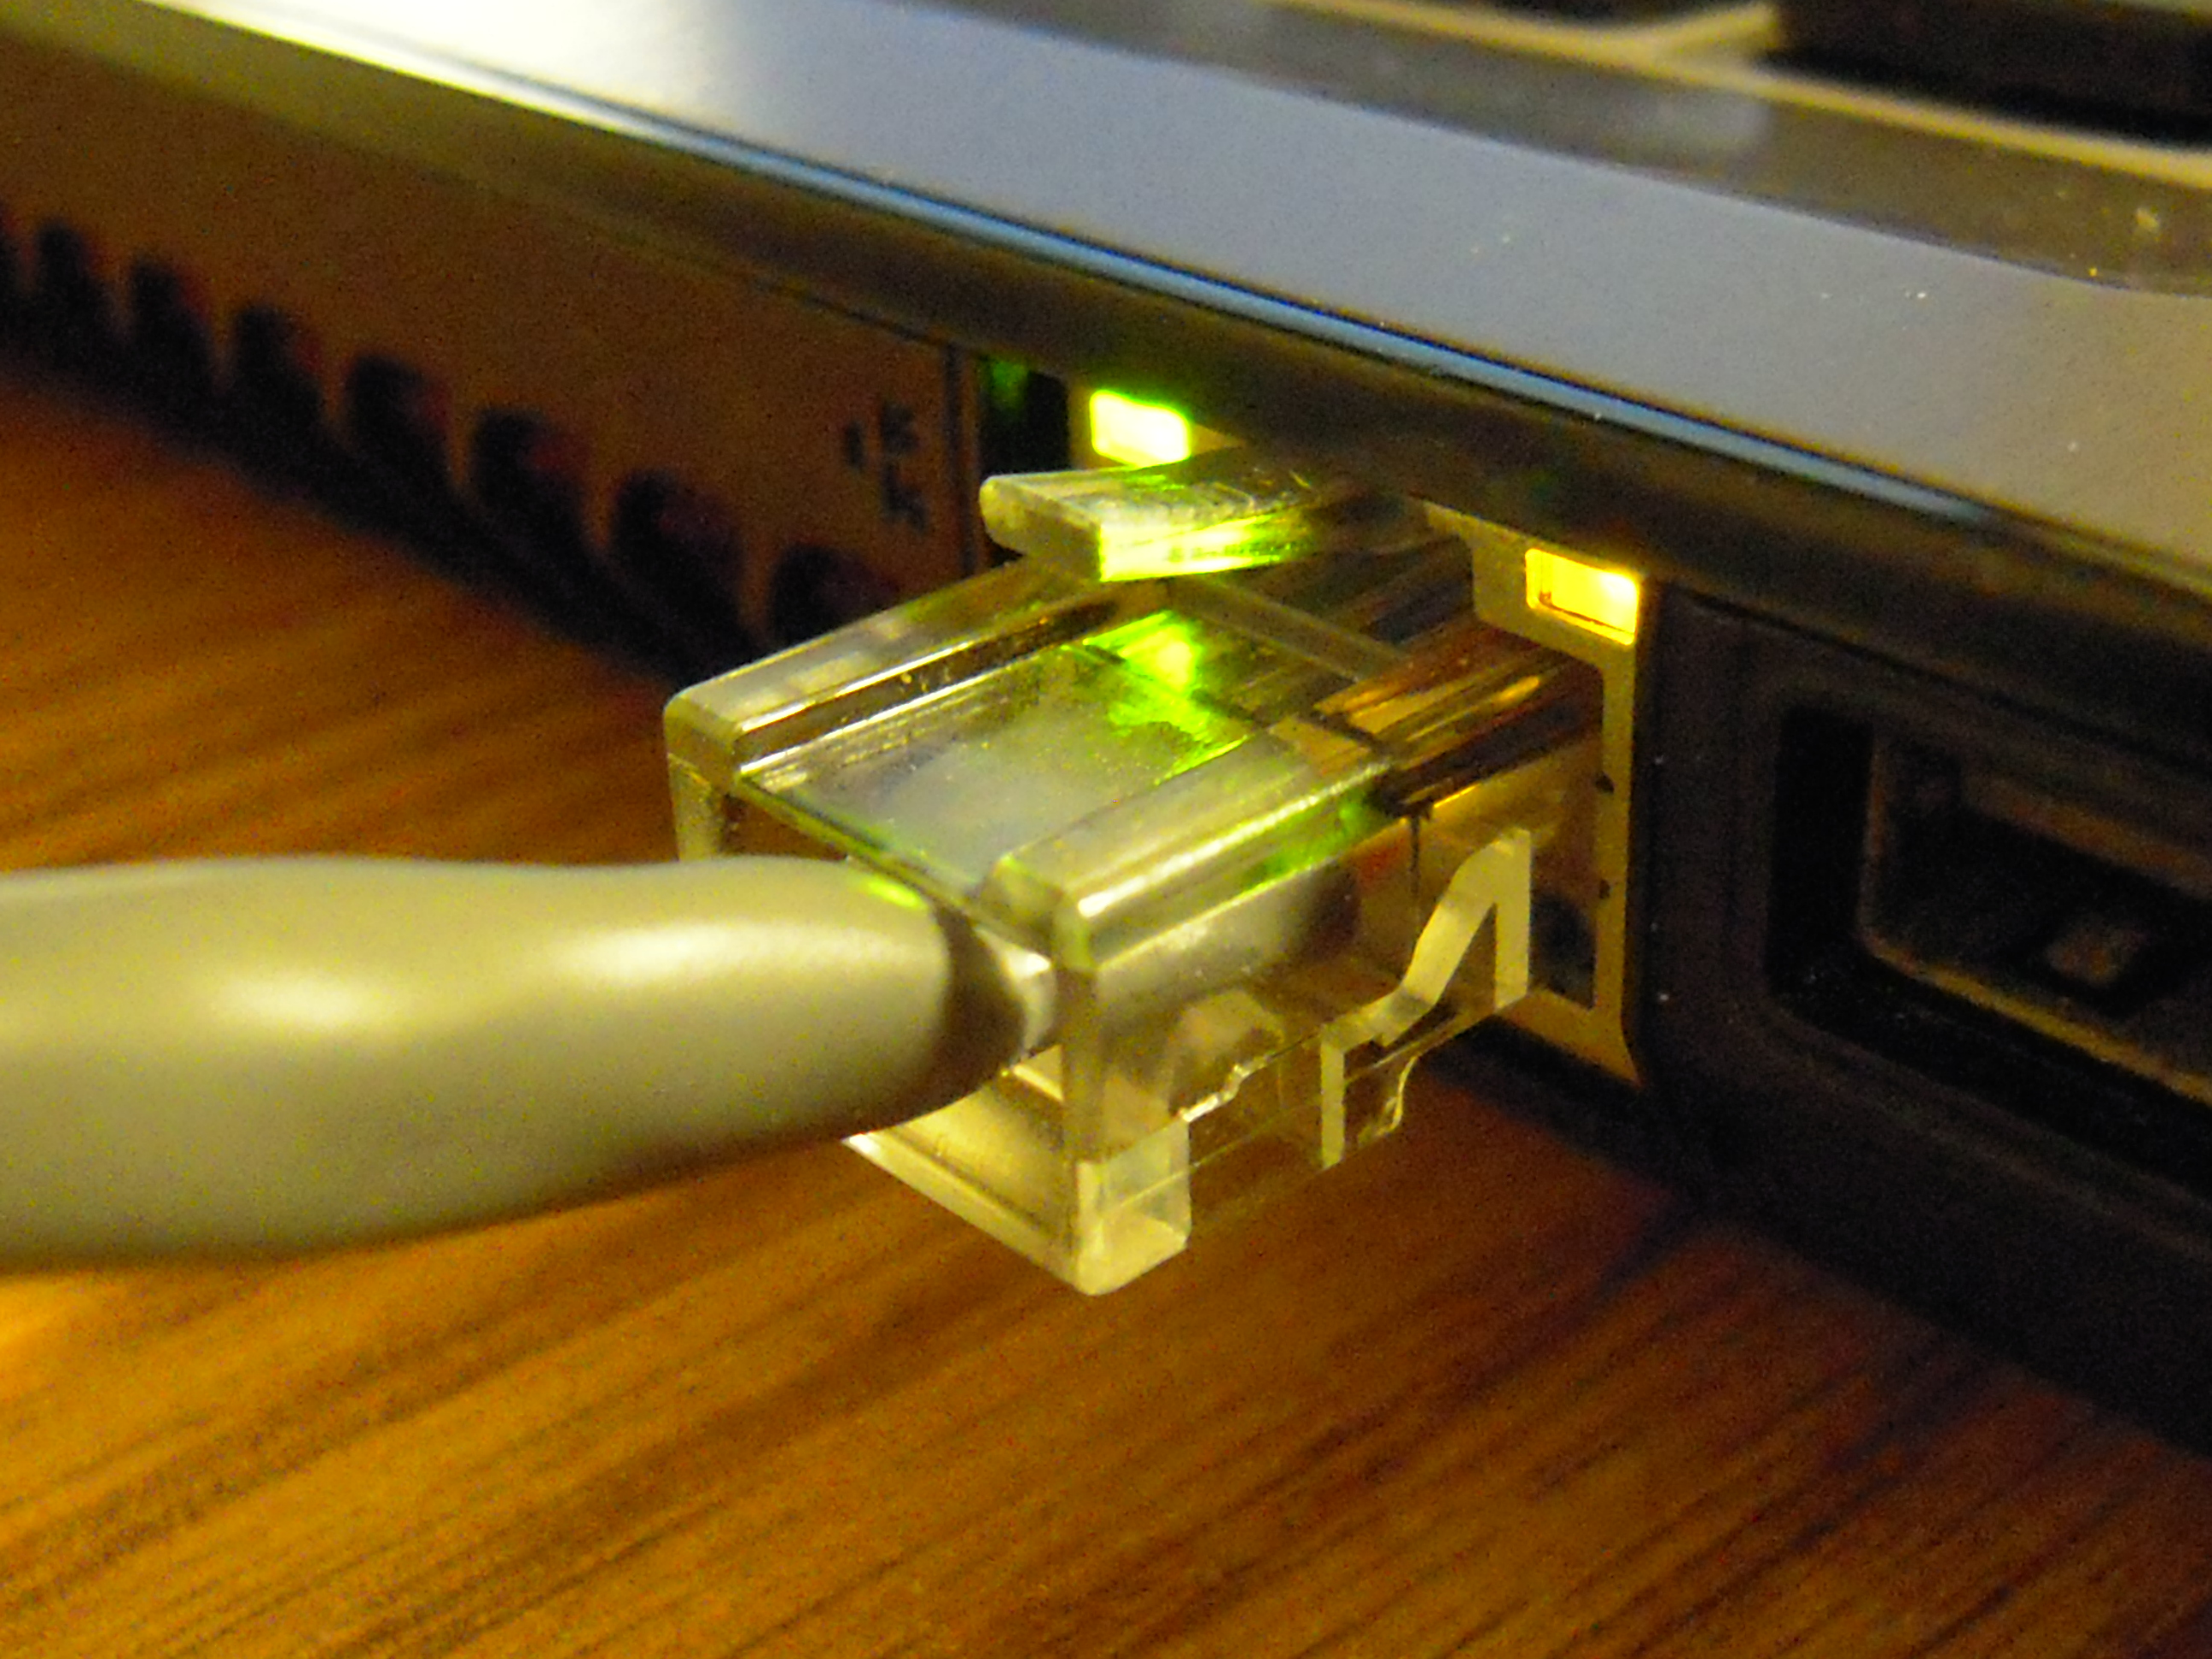 Network cables being plugged into a computer.